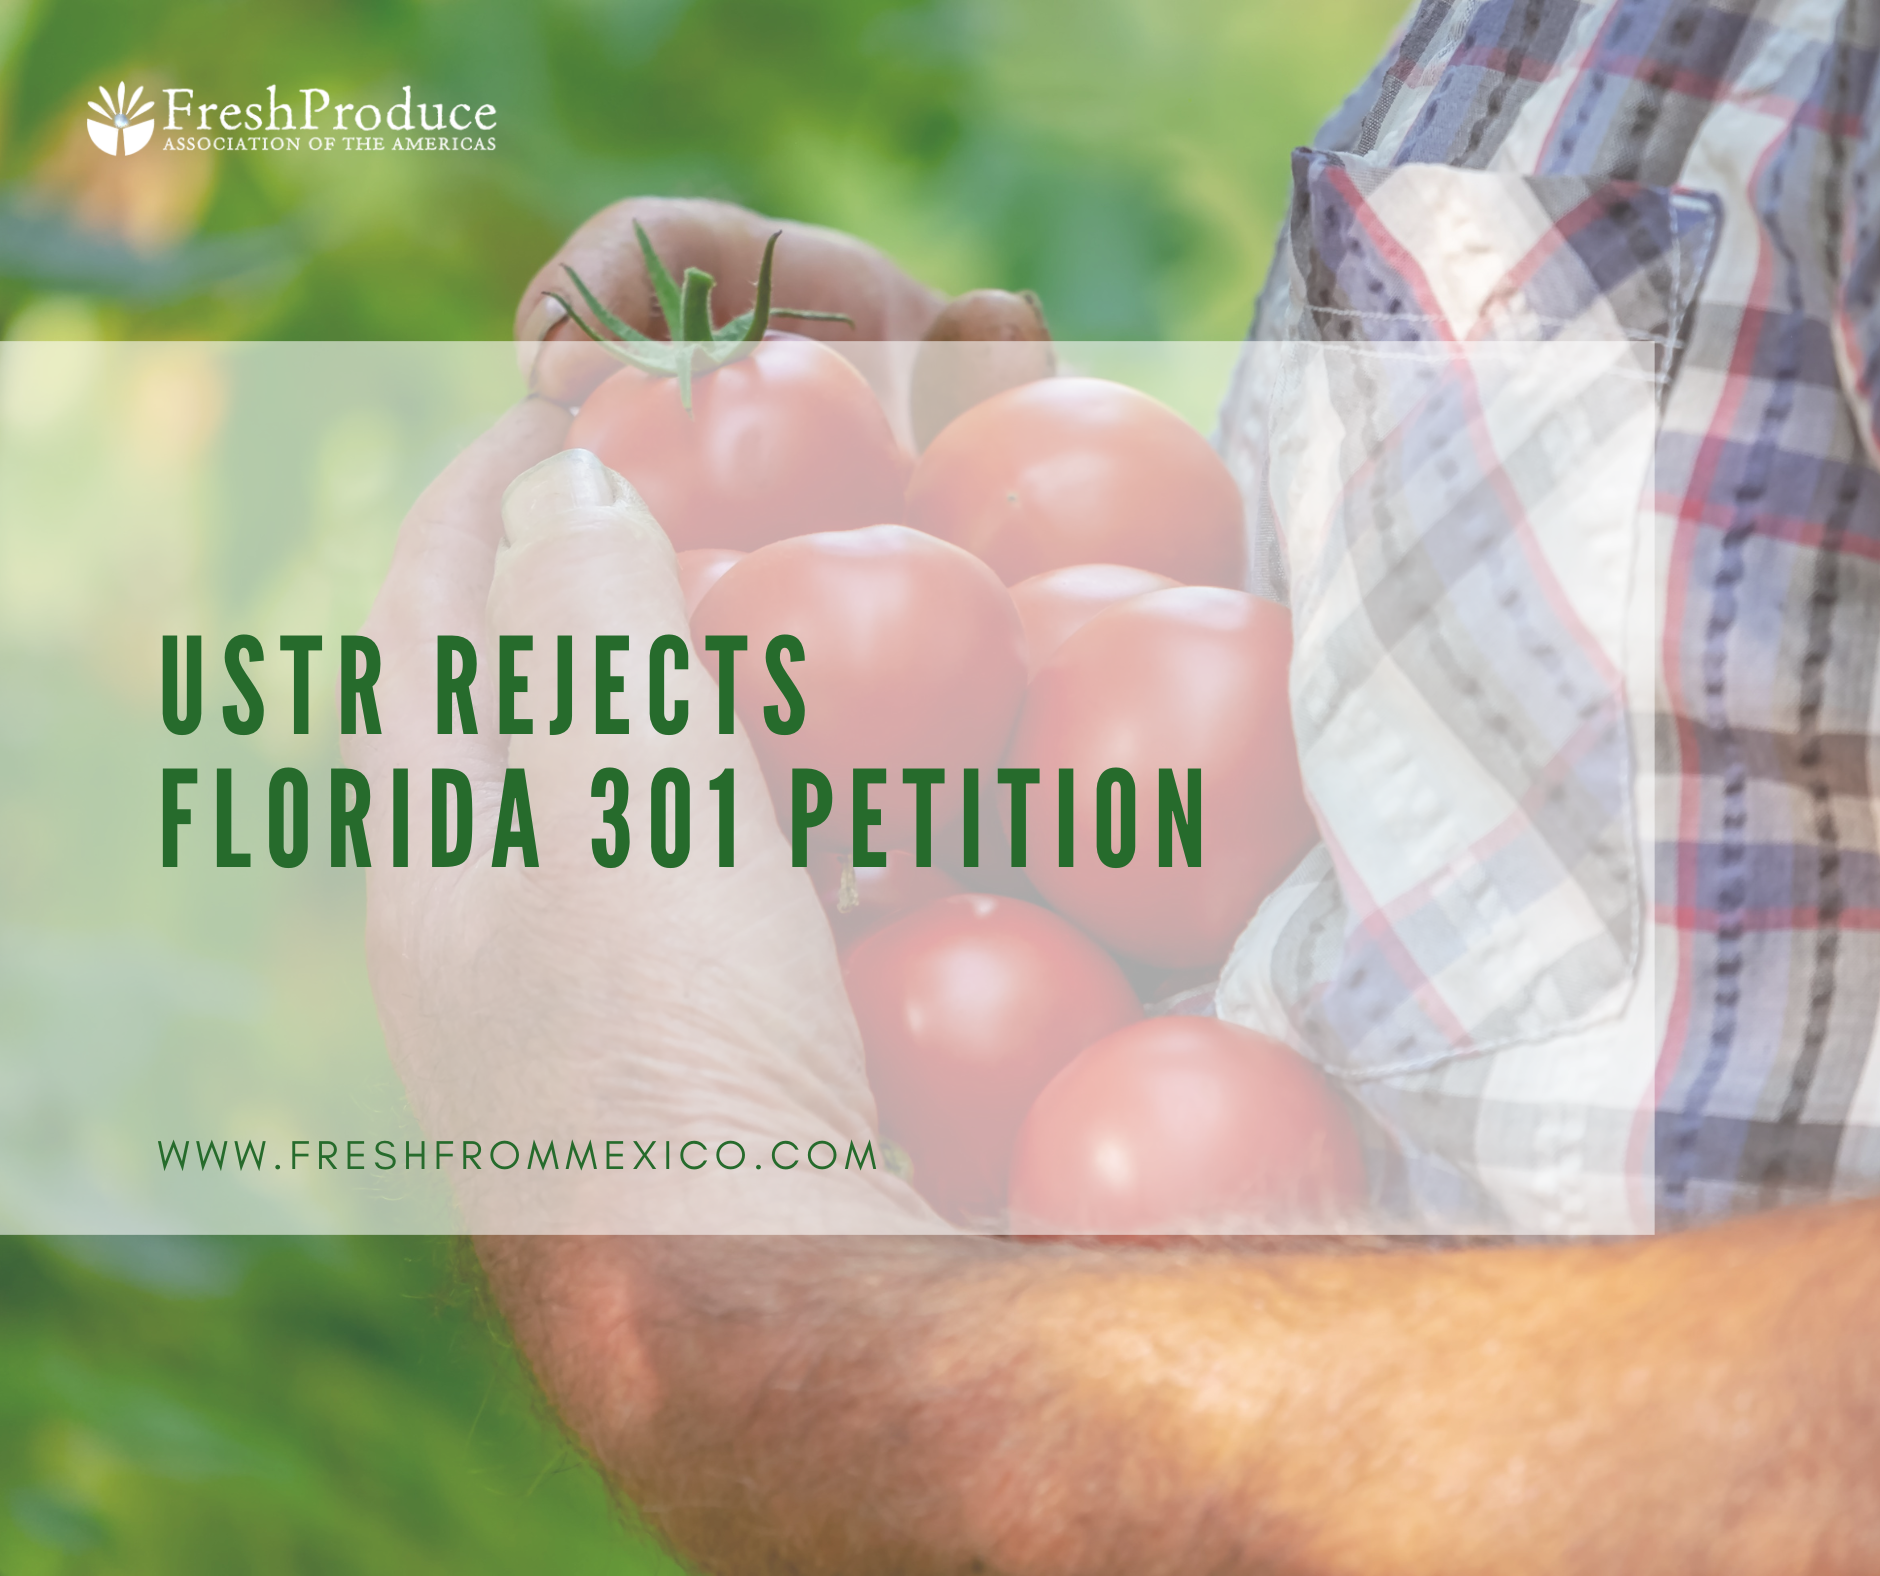 FPAA Applauds USTR for Rejecting Florida 301 Petition